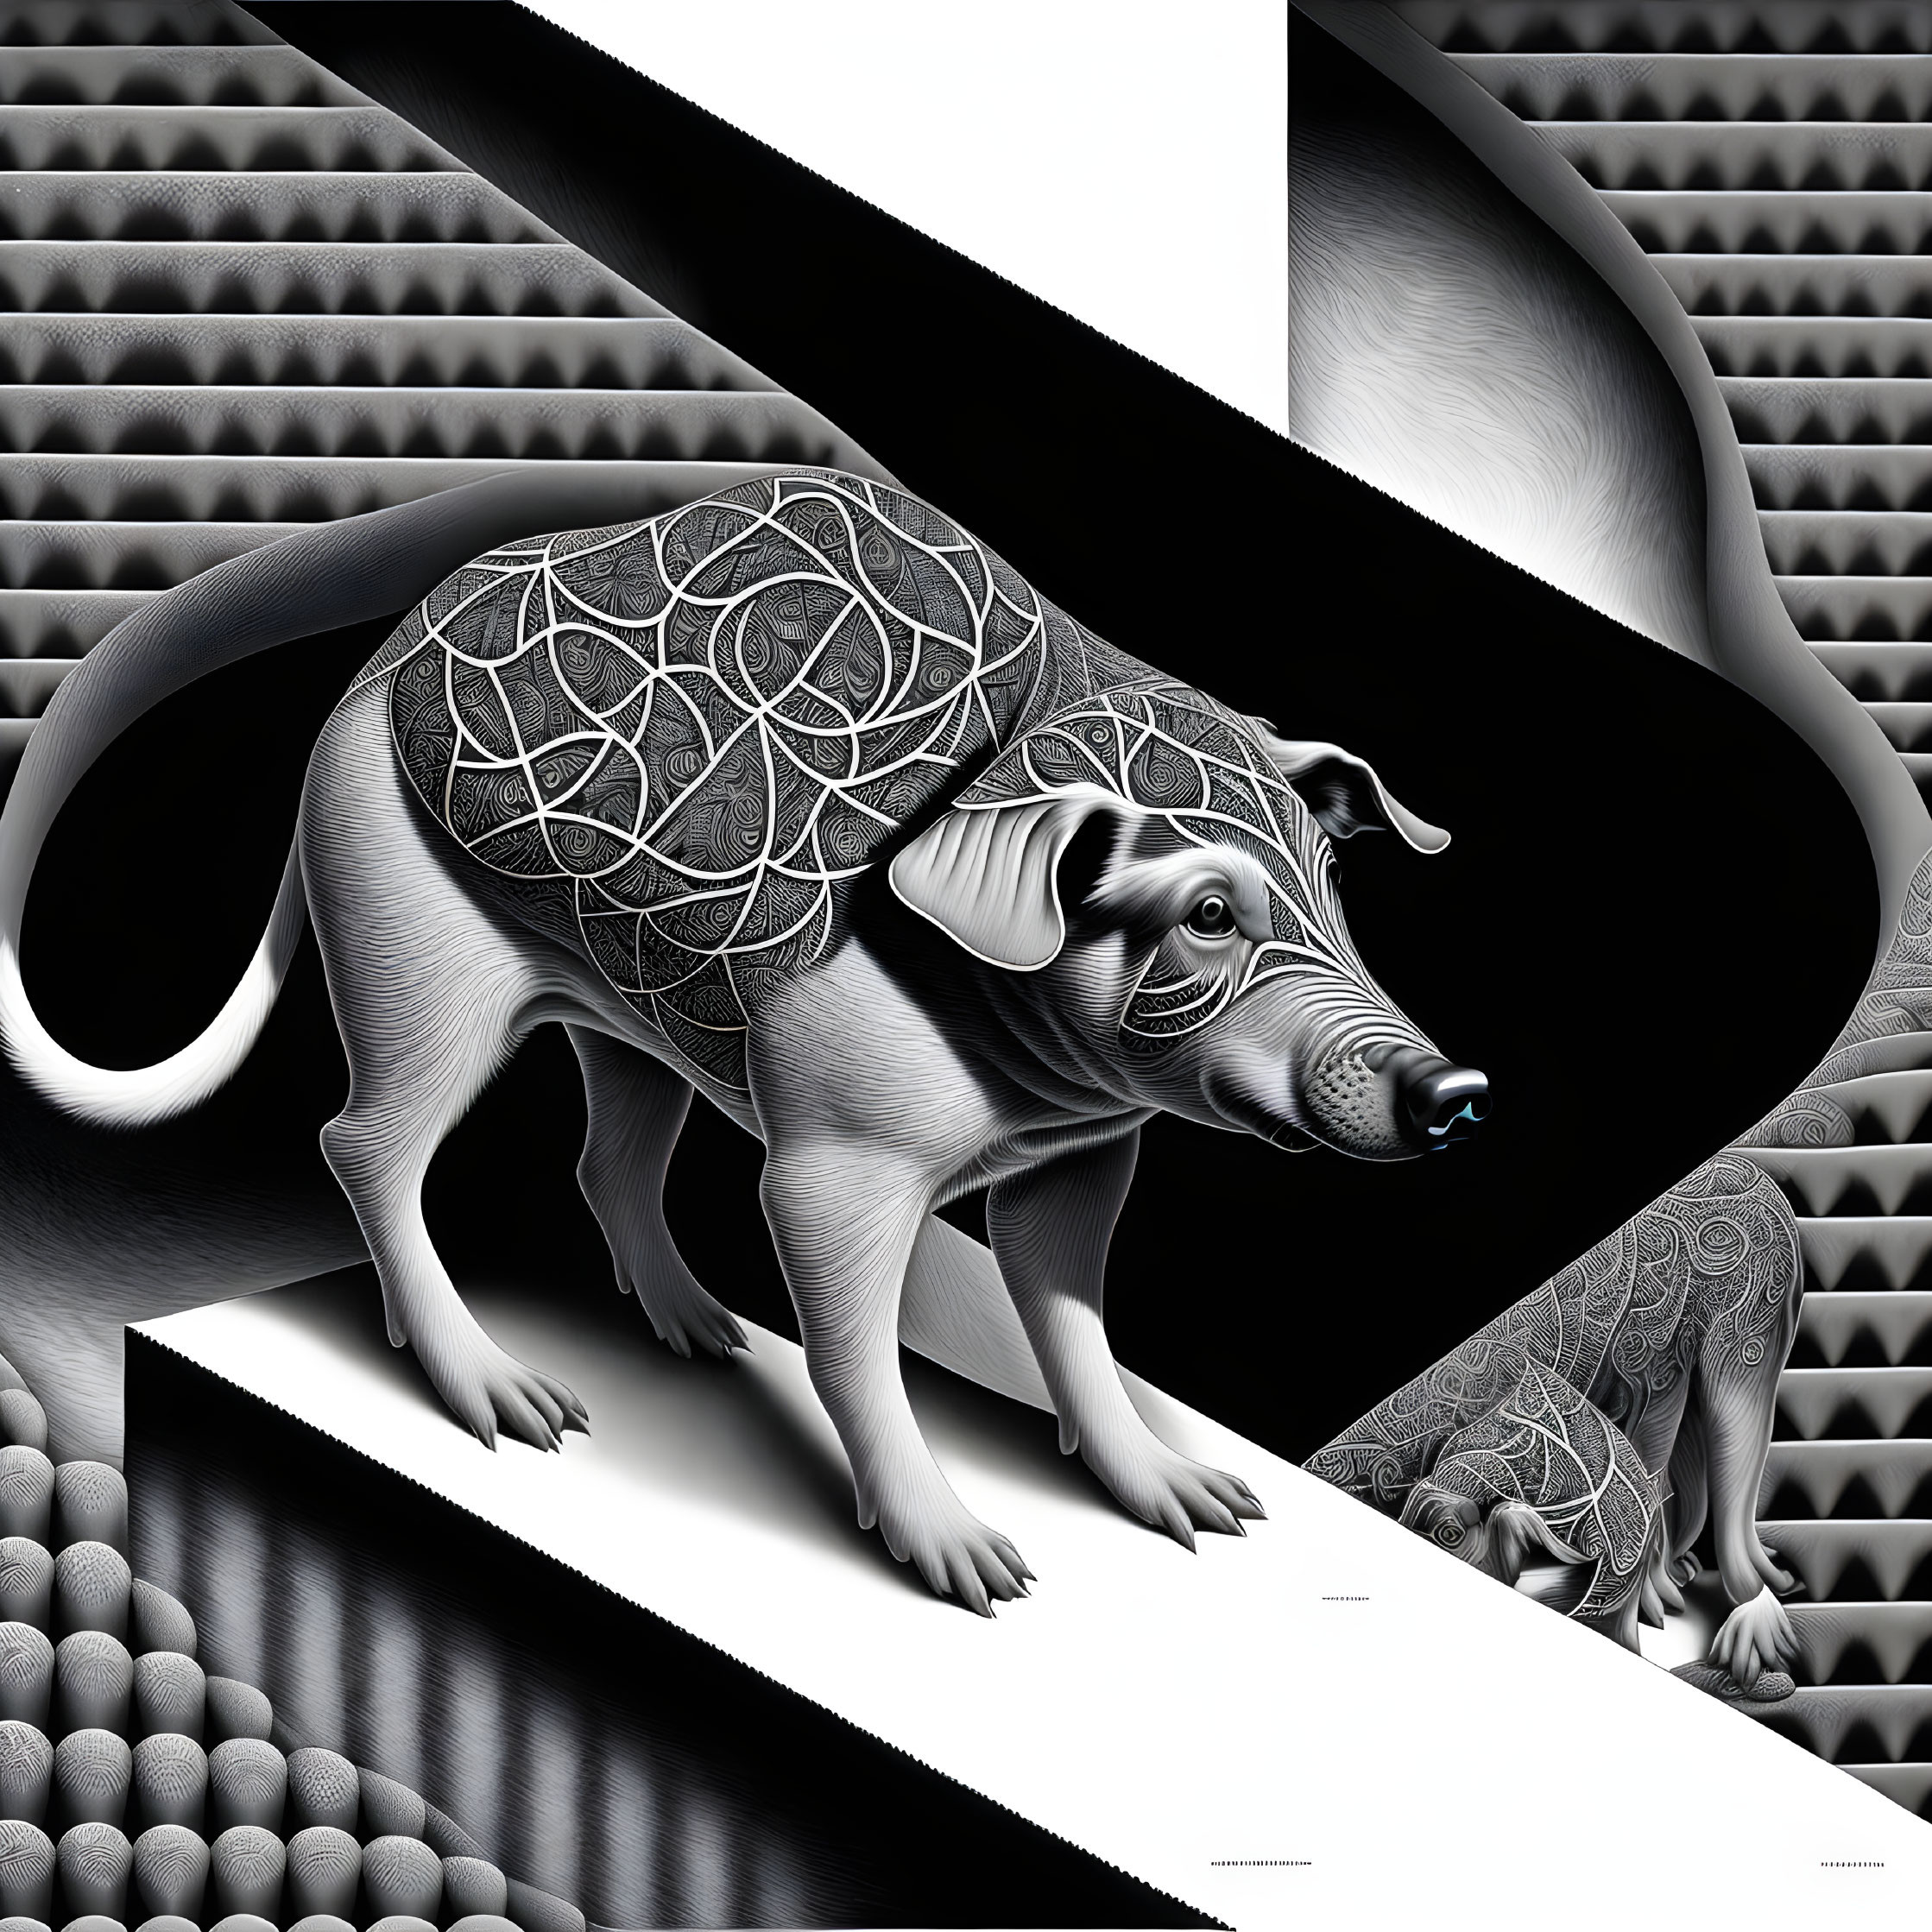 Stylized dogs with intricate patterns on black and white geometric background